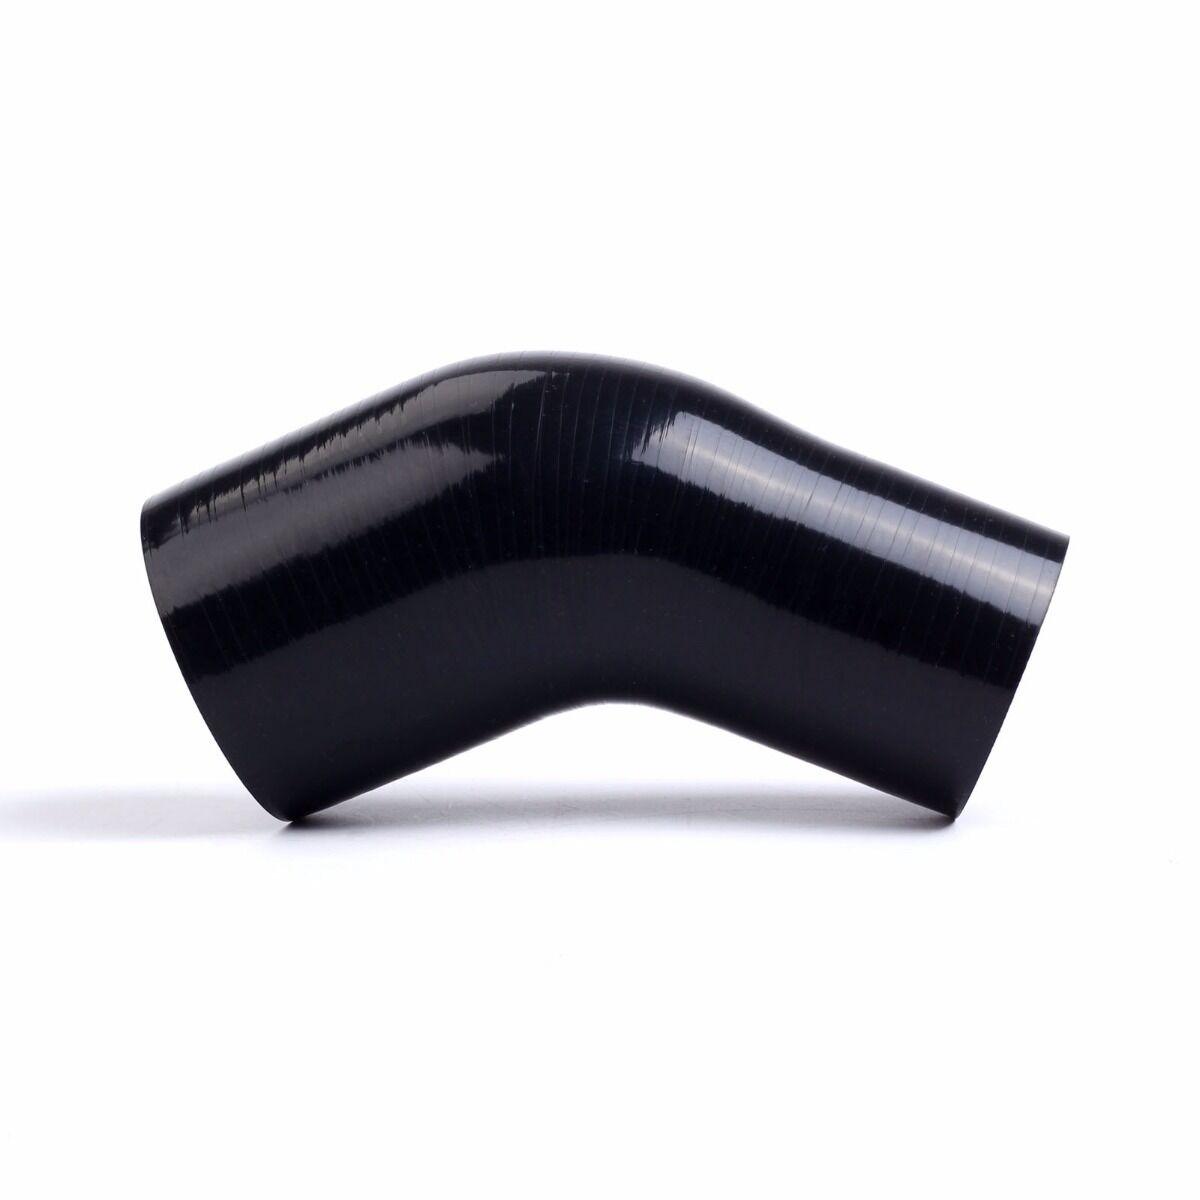 Black 2.0" to 2.5" Inch Silicone 45 Degree Intercooler Pipe Reducer Hose Turbo - www.blackhorse-racing.com